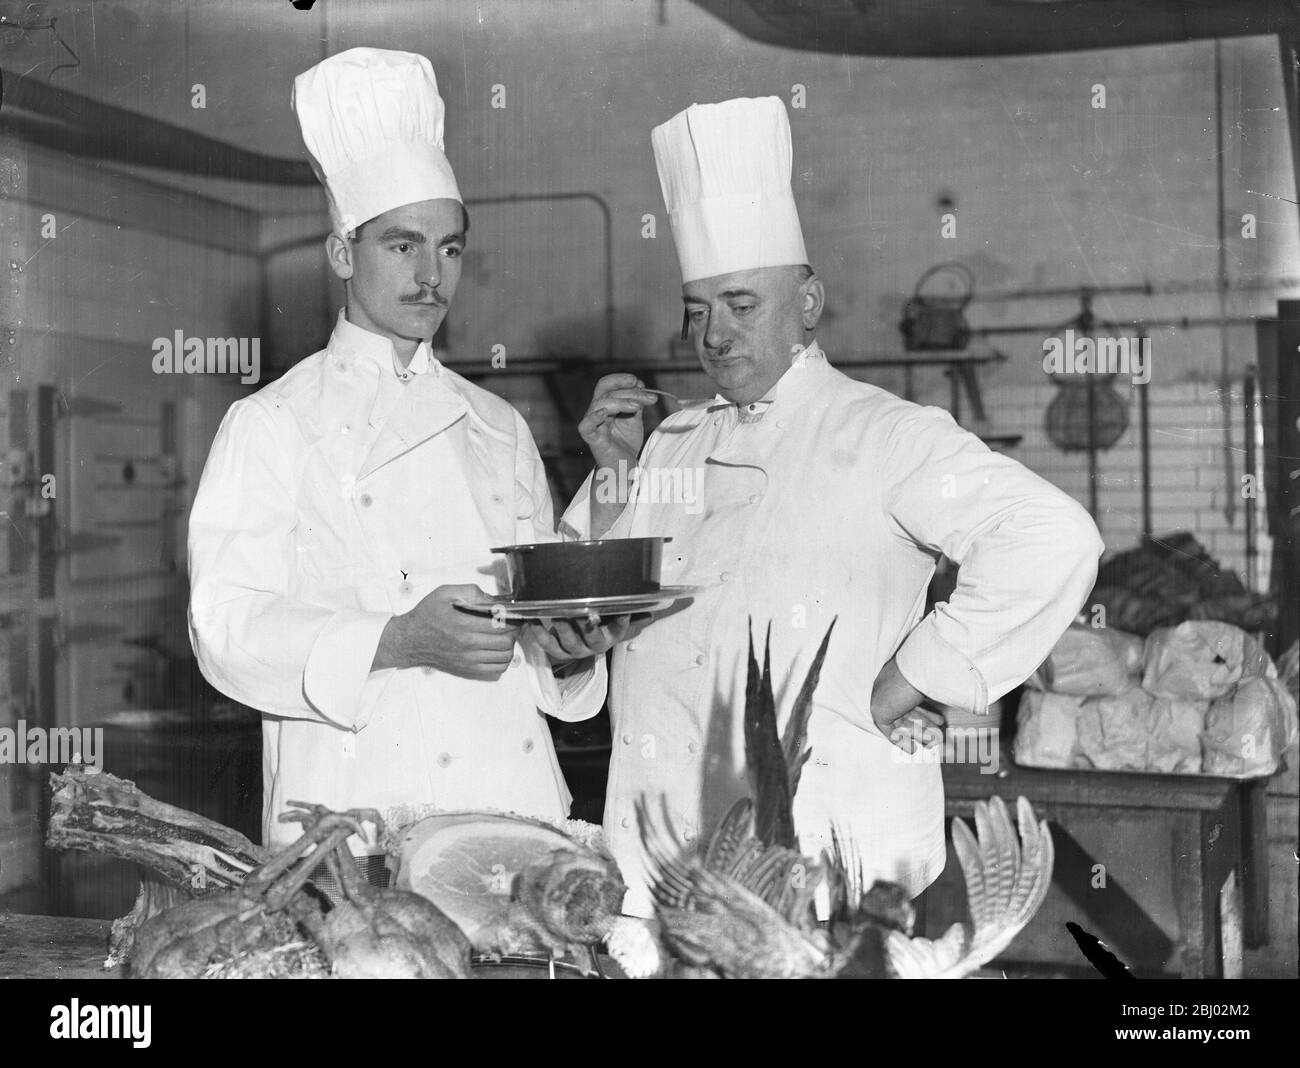 Admiral ' s Son as Chef - Mr Roderick Stanhope Wemyss , Son of Vice Admiral Edward Wemyss , is now working at Grosvenor house as assistant chef . The first step in his new career of running an hotel . - M . H Malet , the chef , in one picture is seen on right , tasting soup prepared by Mr Wemyss - 13th January 1933 Stock Photo